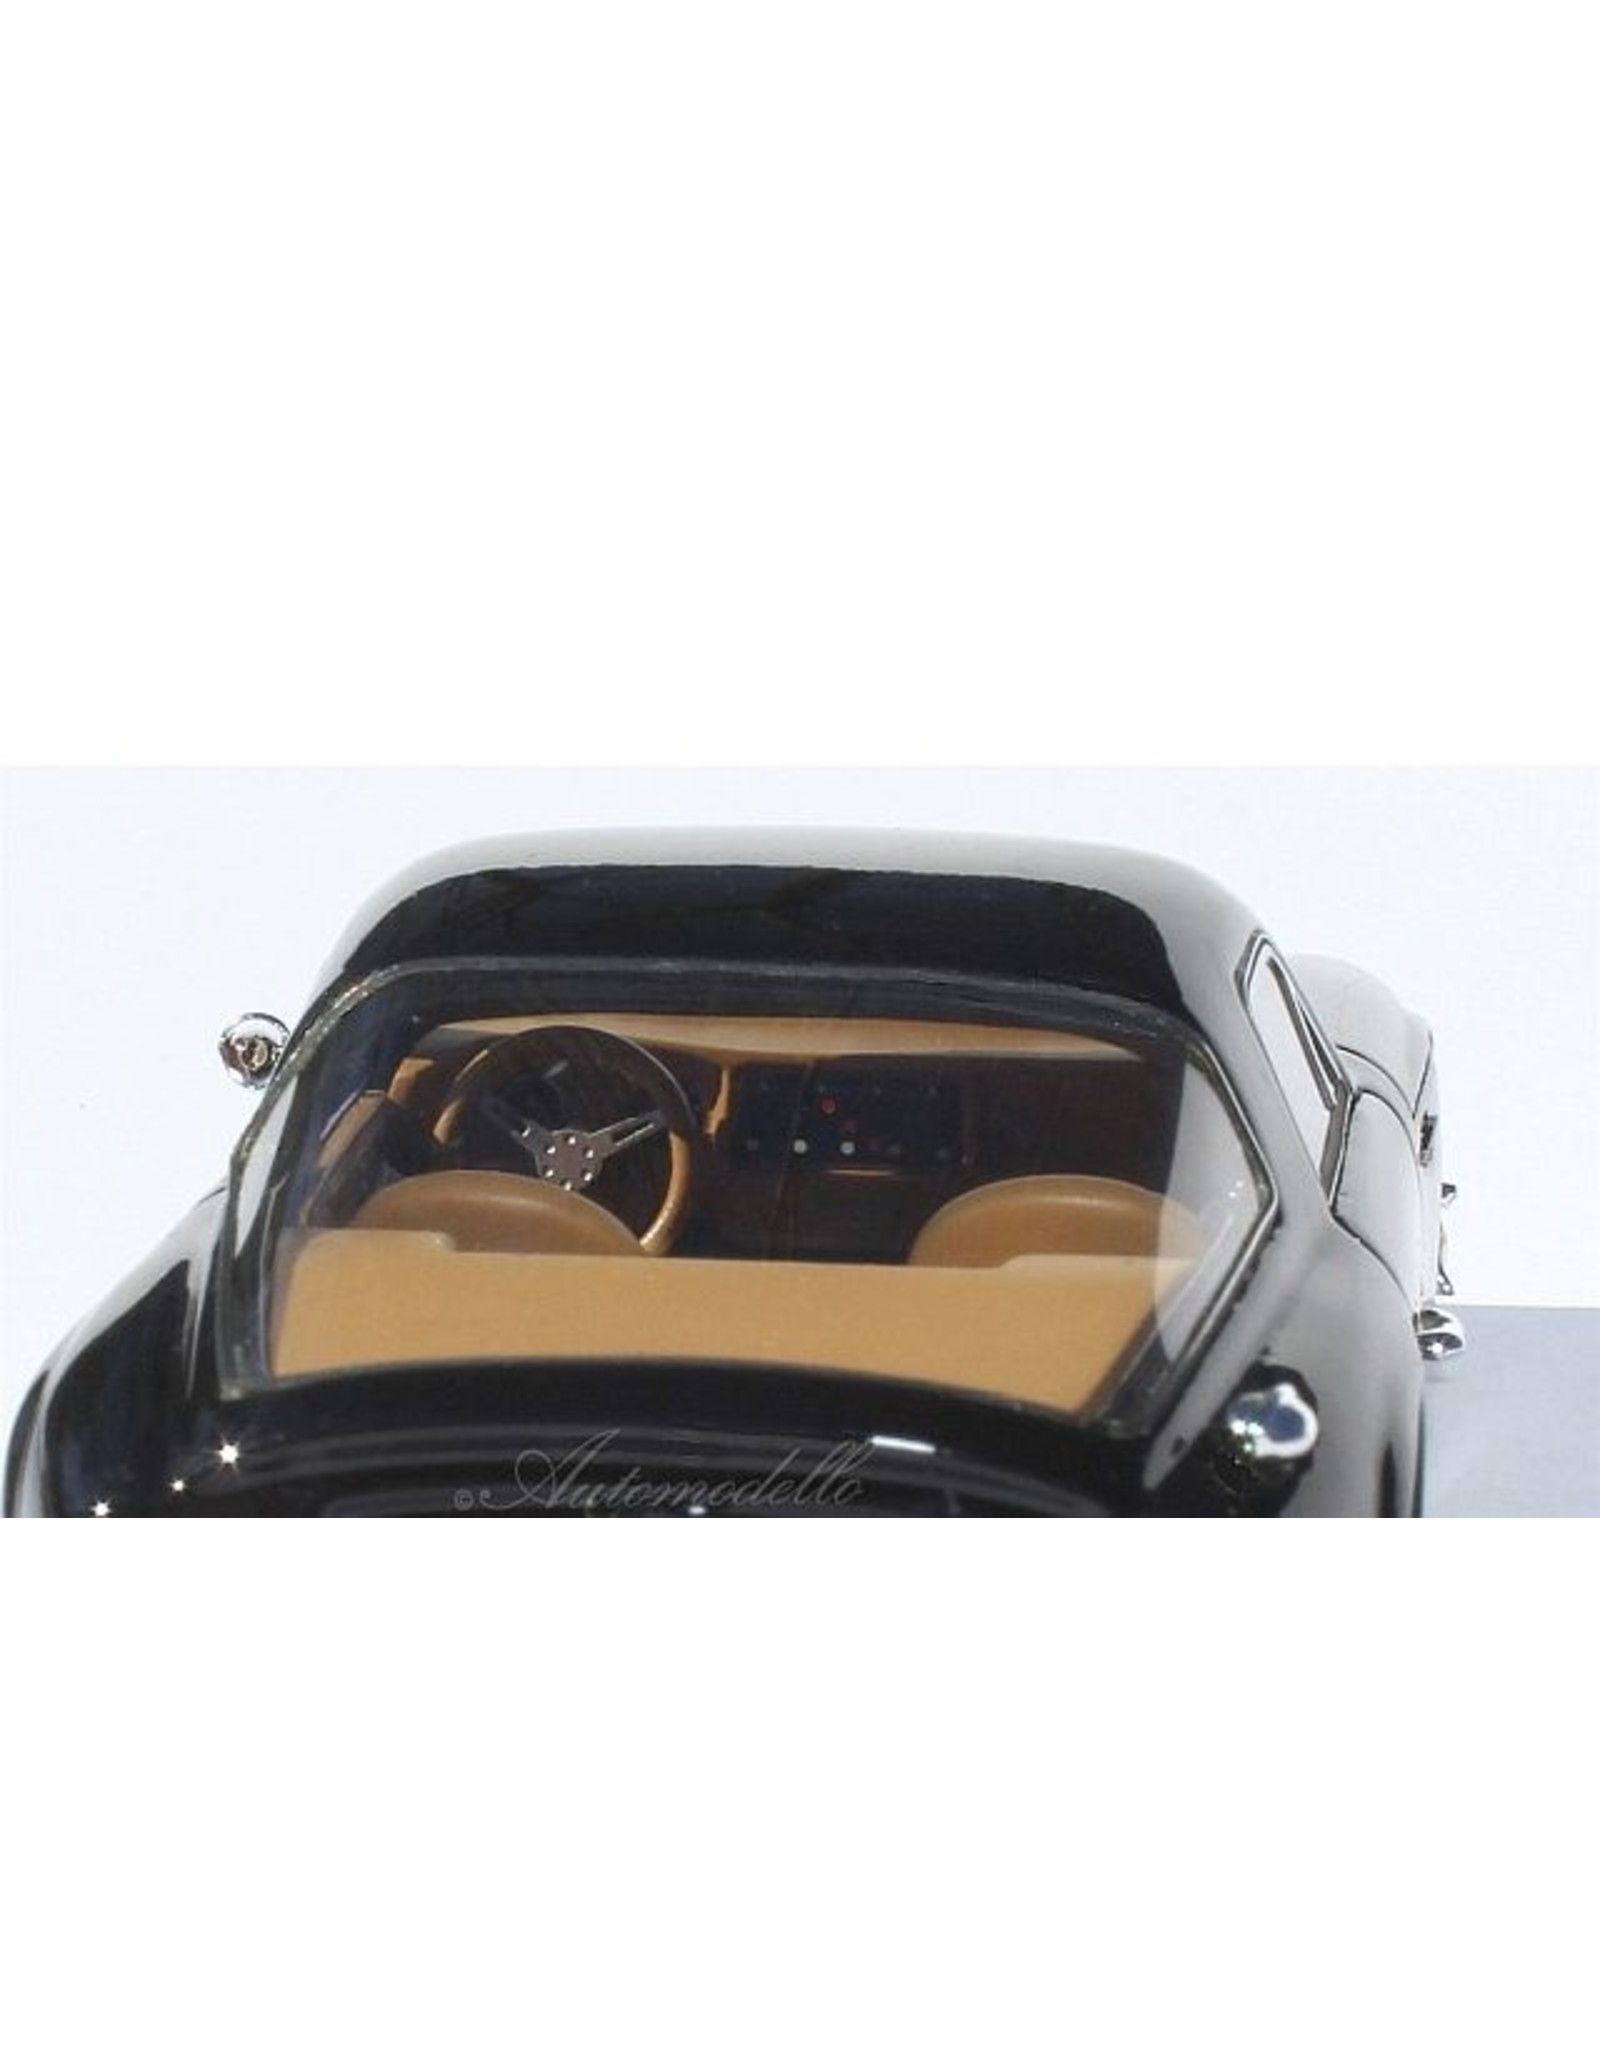 Griffith TVR Griffith Series 400(1965)Econium Edition black.